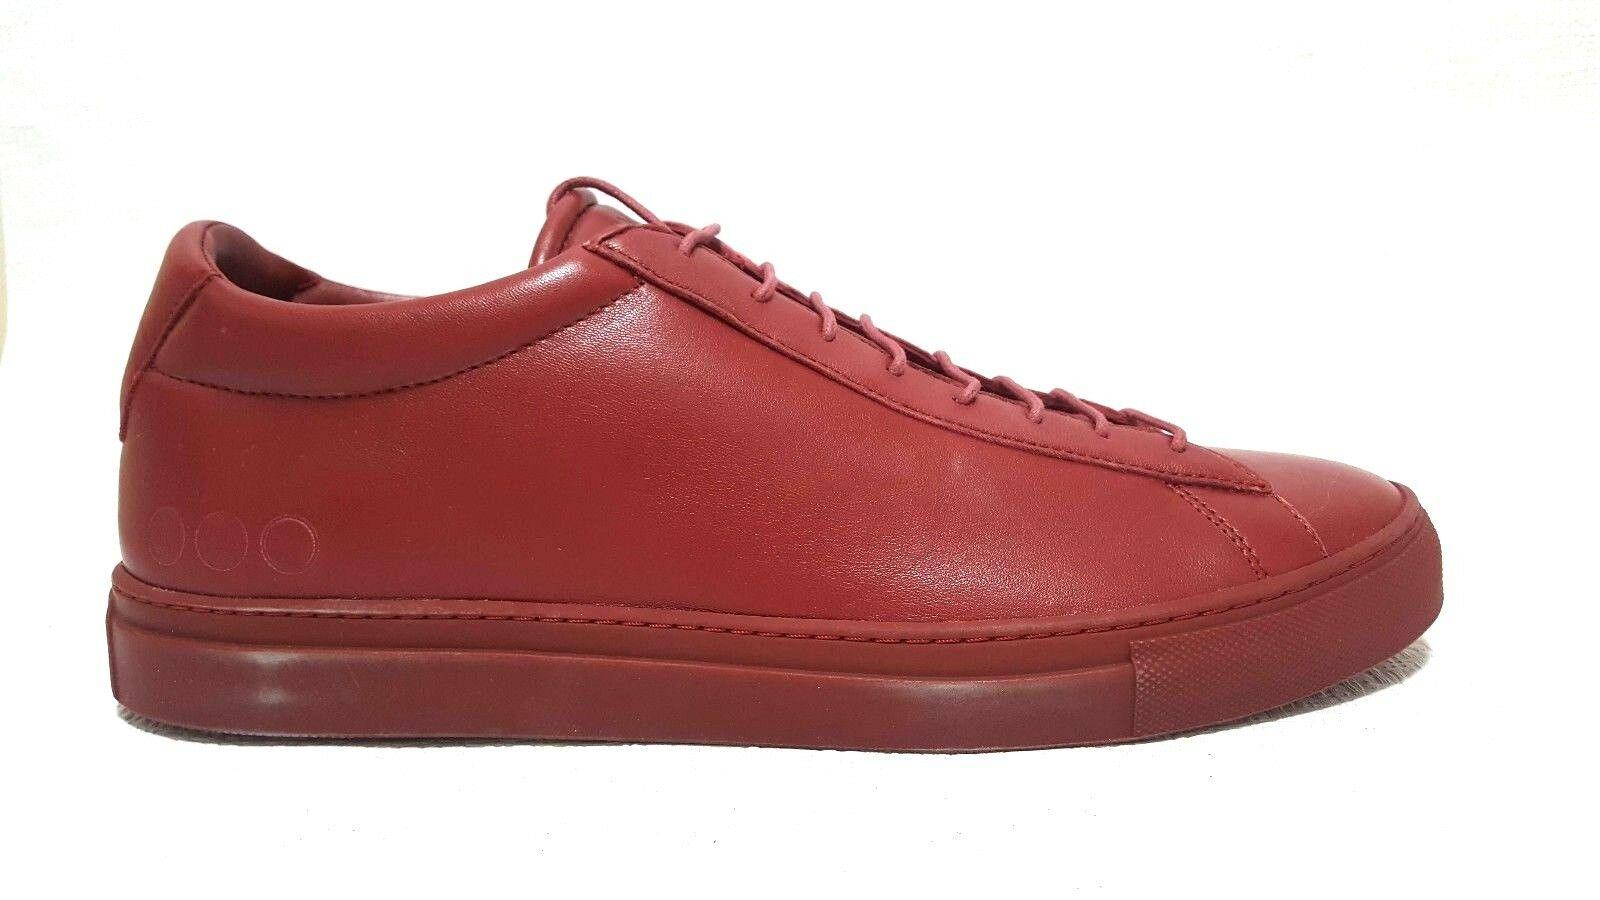 PRIMA FORMA Drew Mens Low-Top Leather Sneaker Shoes Red Leather EU 45 Rare - SVNYFancy